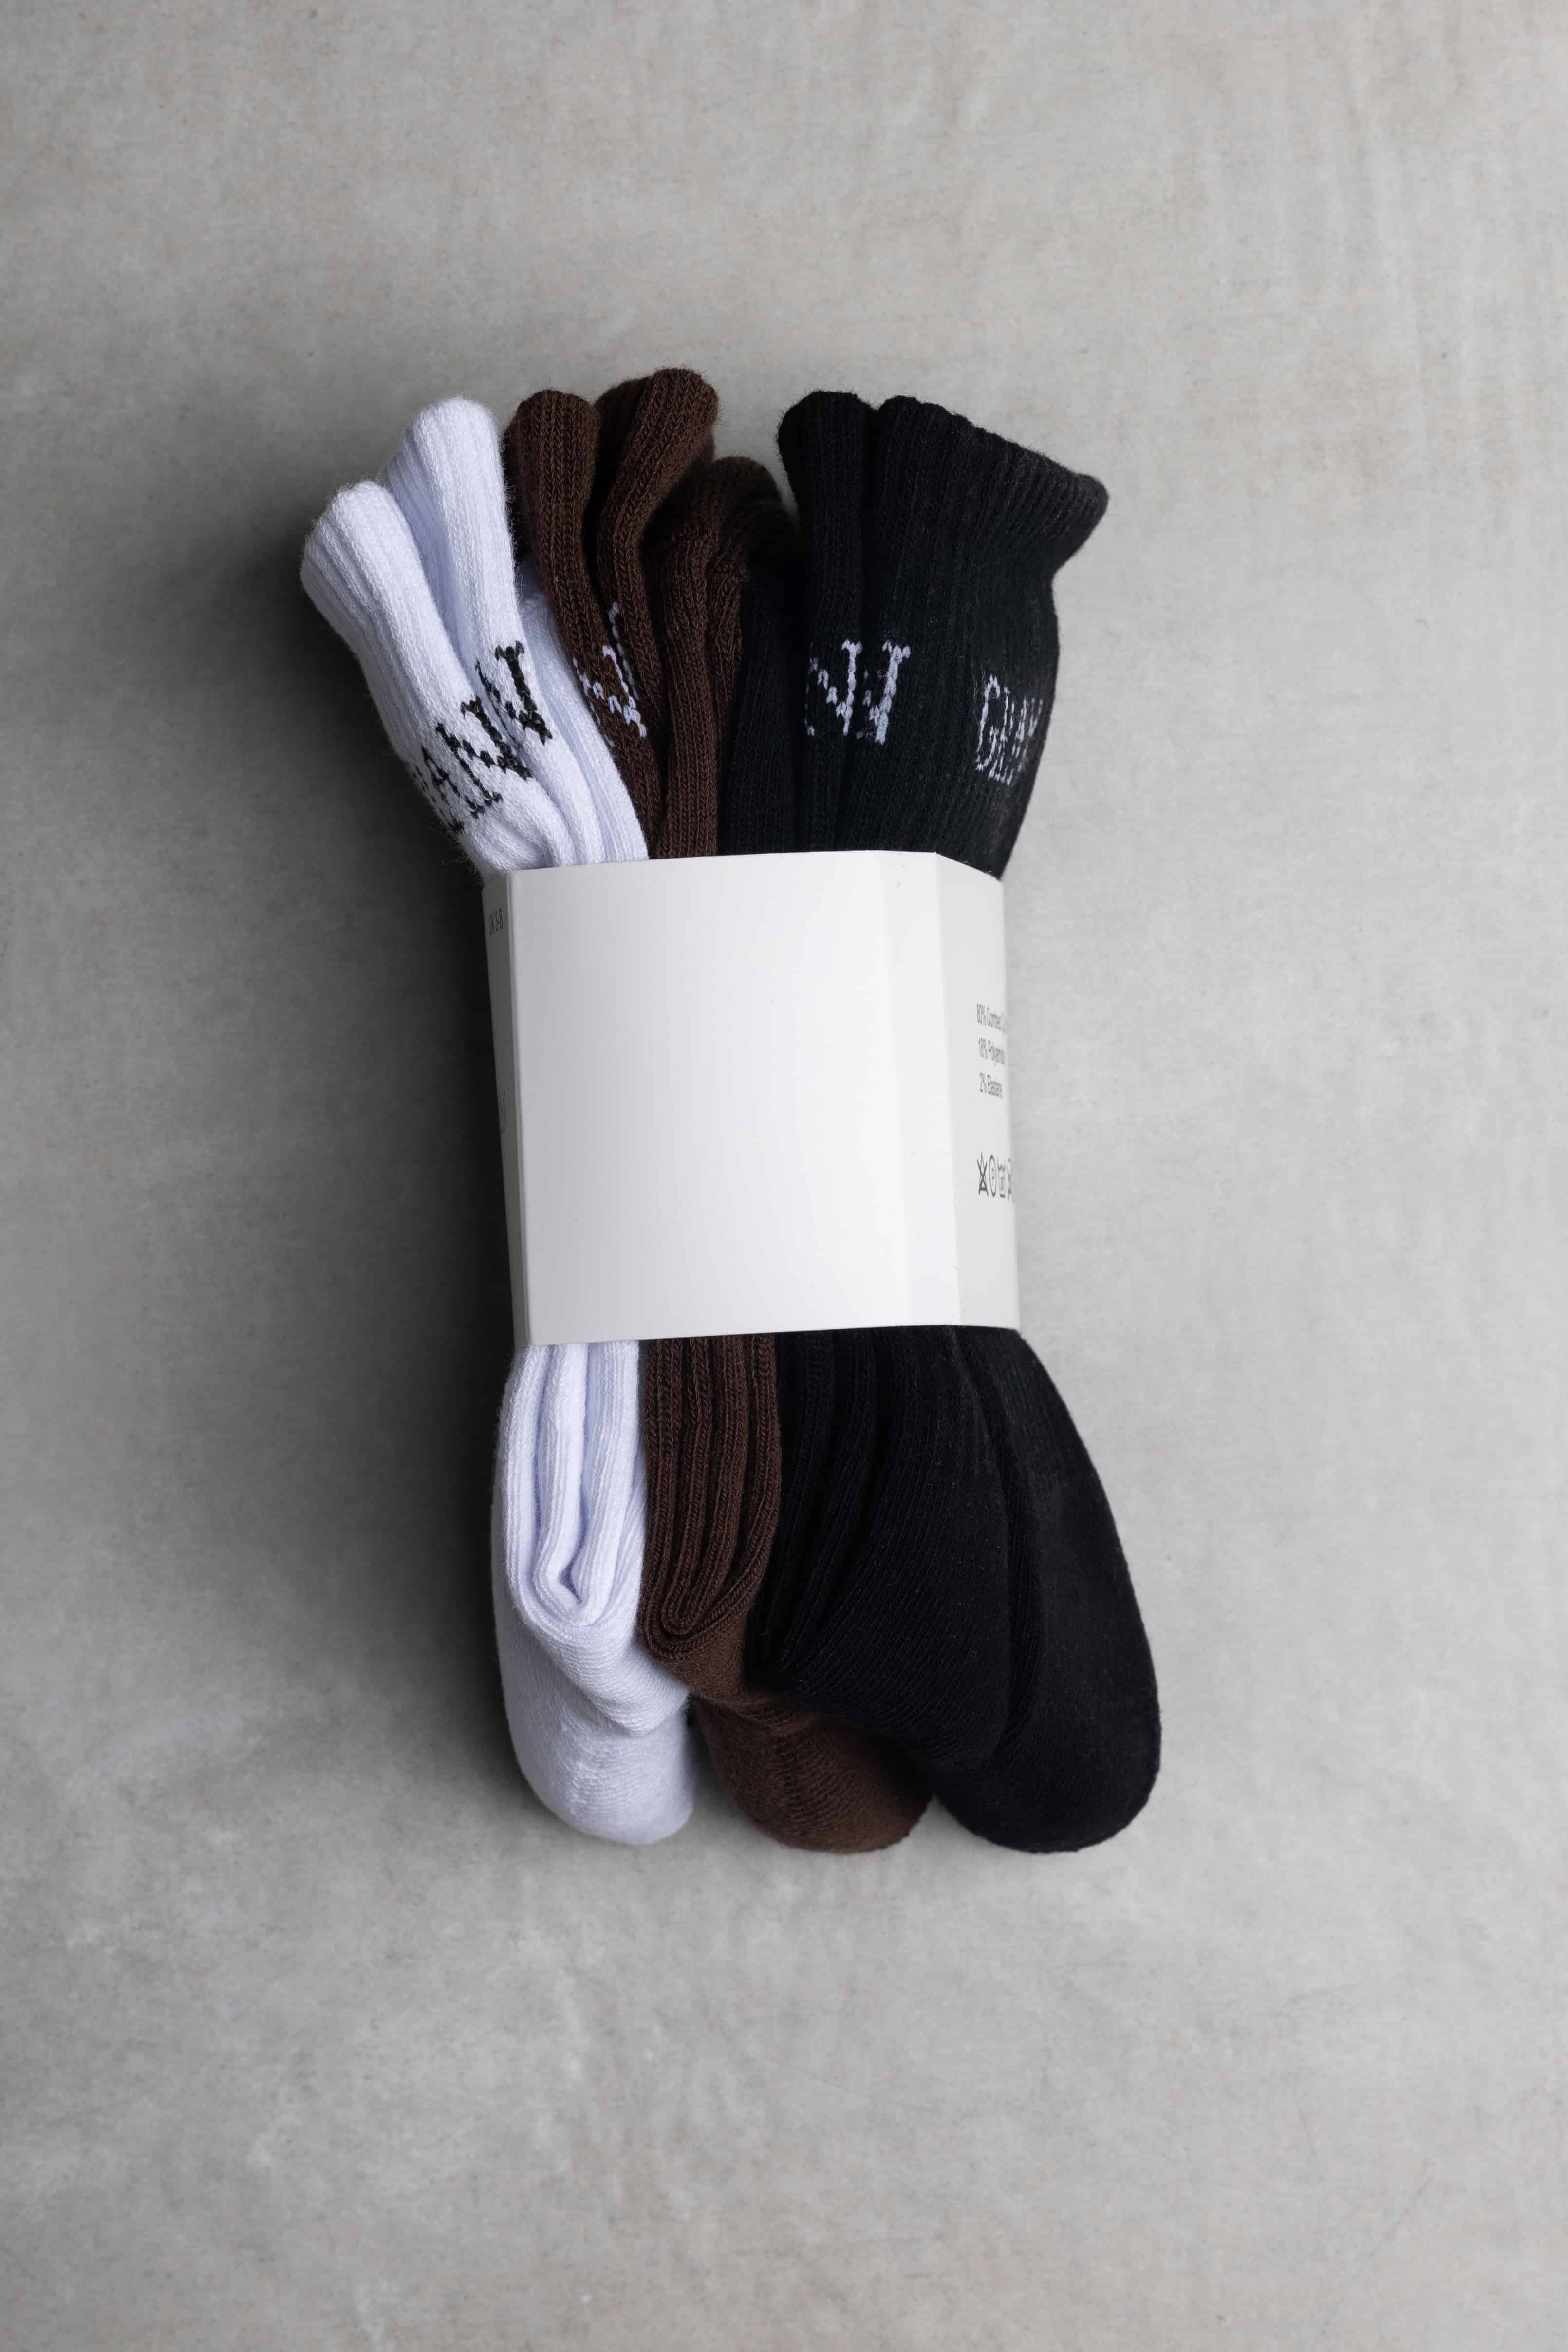 A picture of our three pack of renew socks.